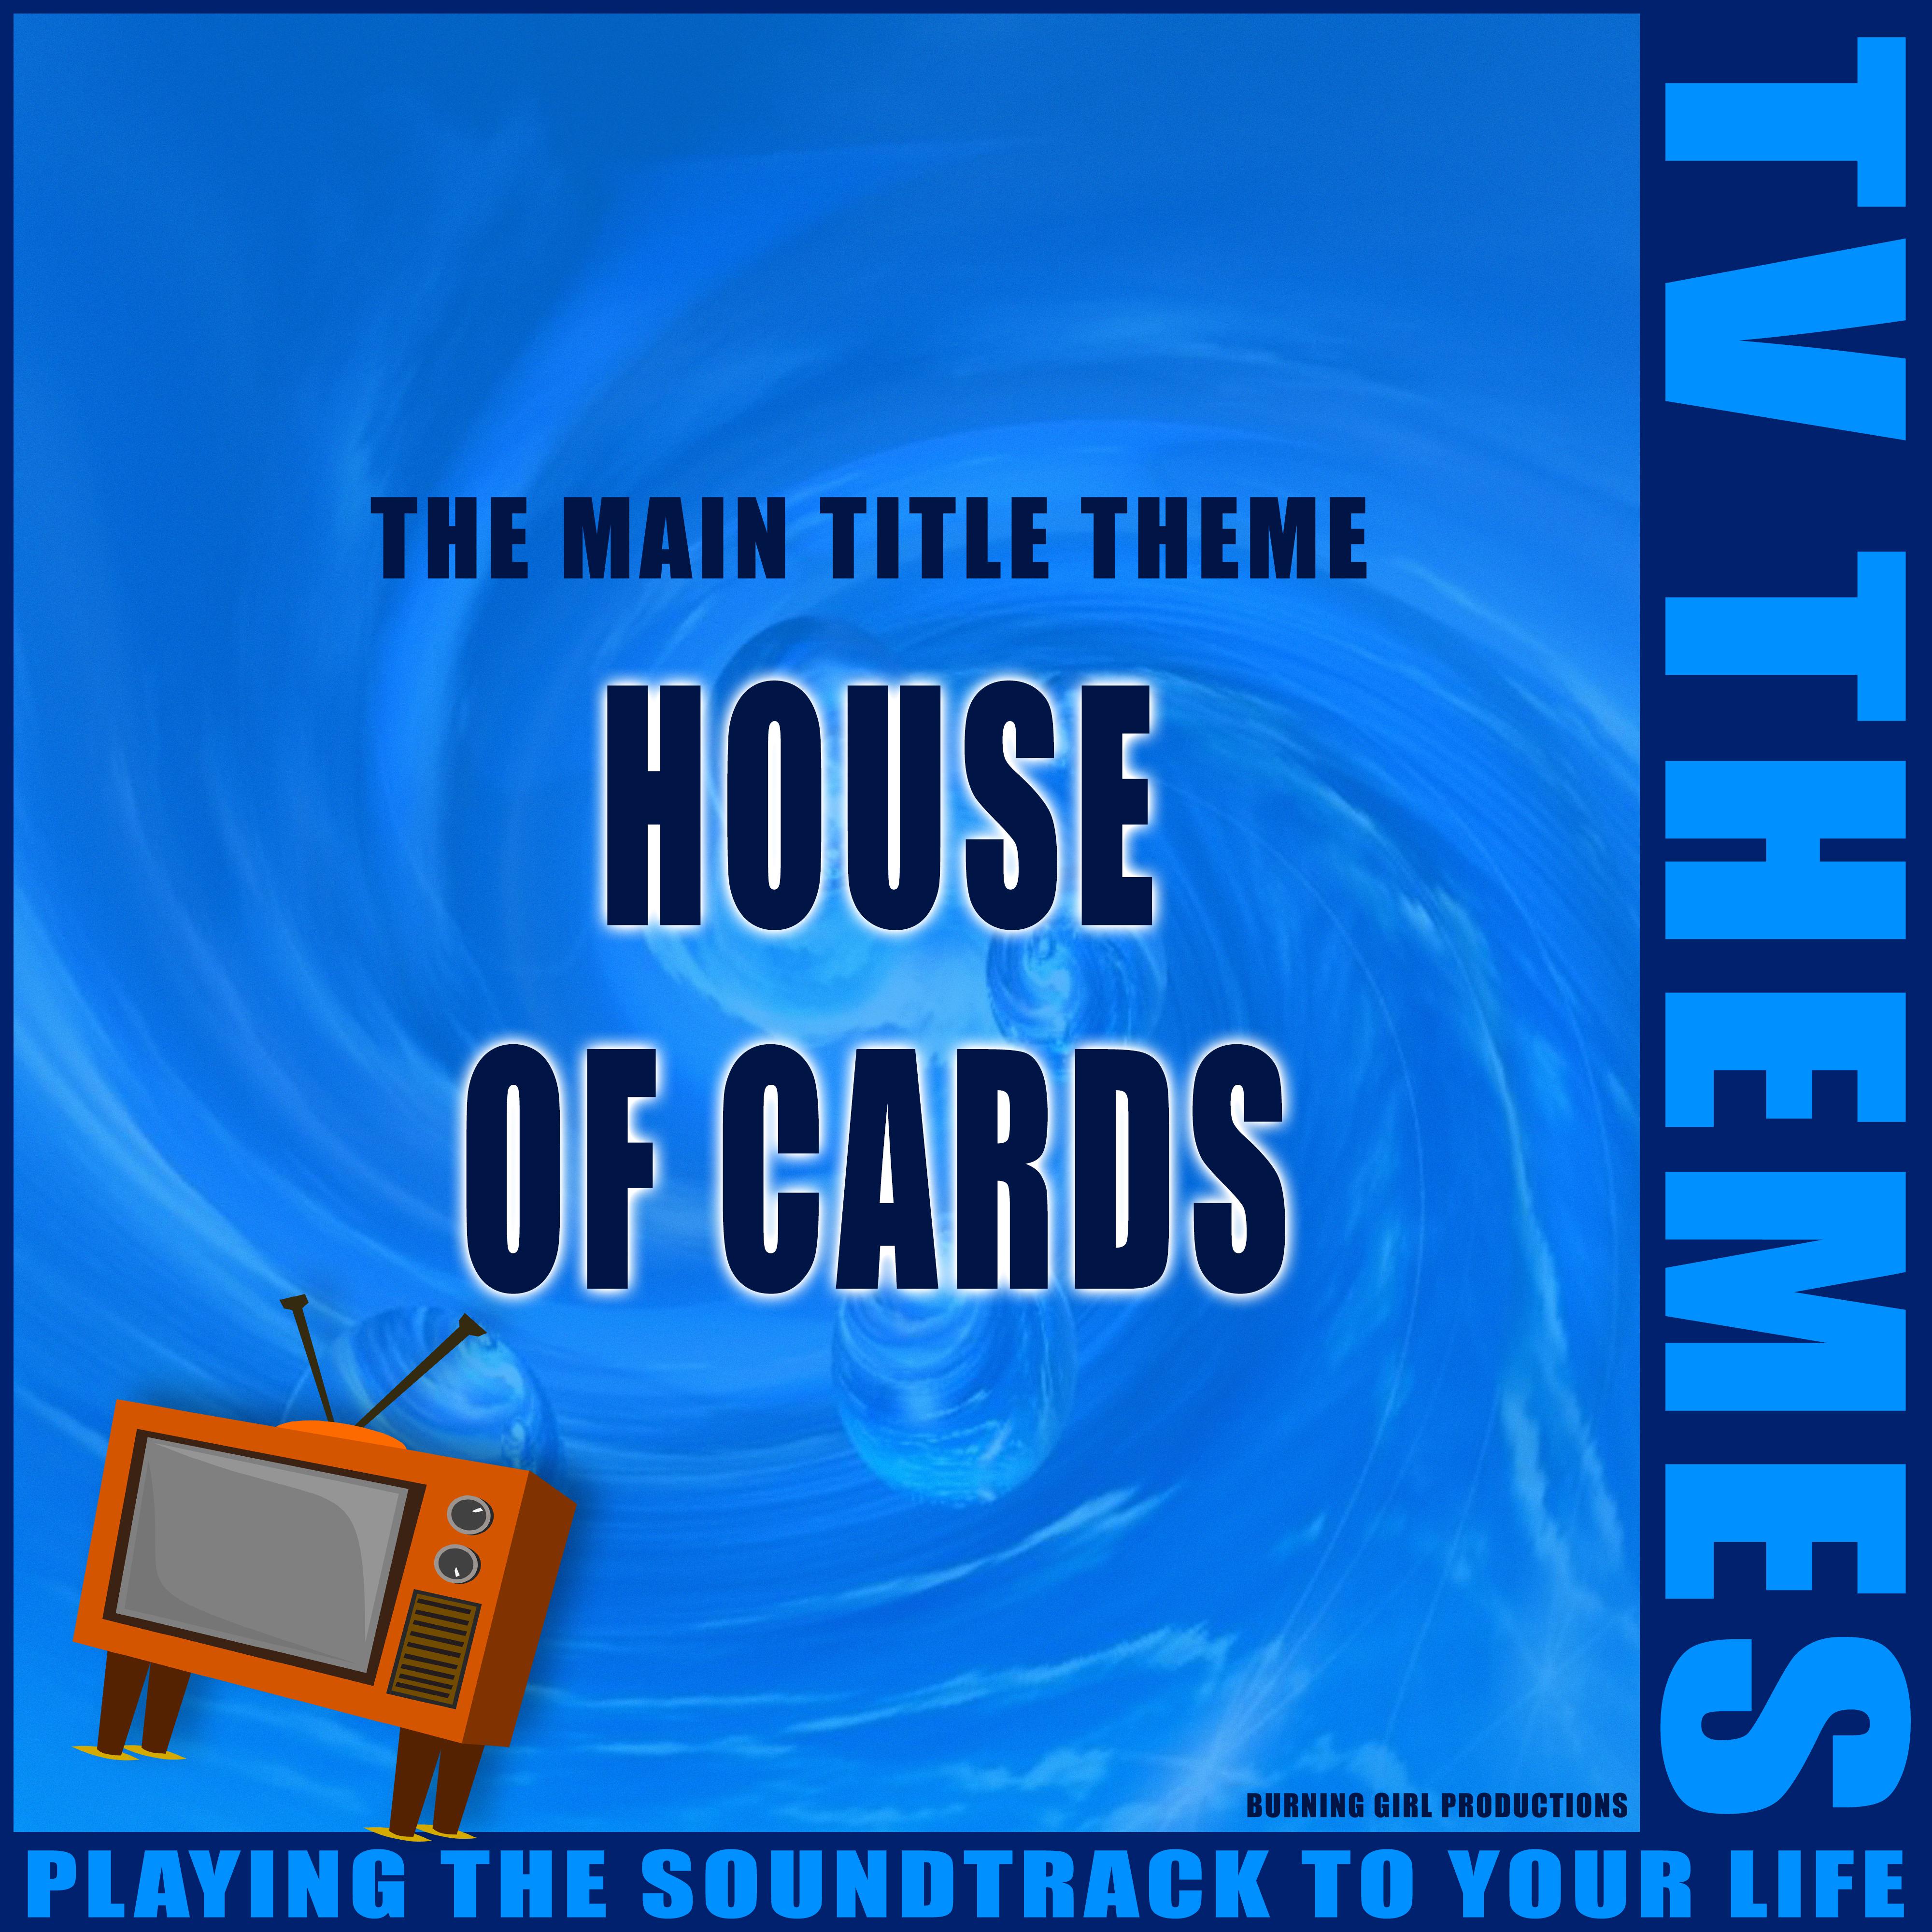 The Main Title Theme - House of Cards